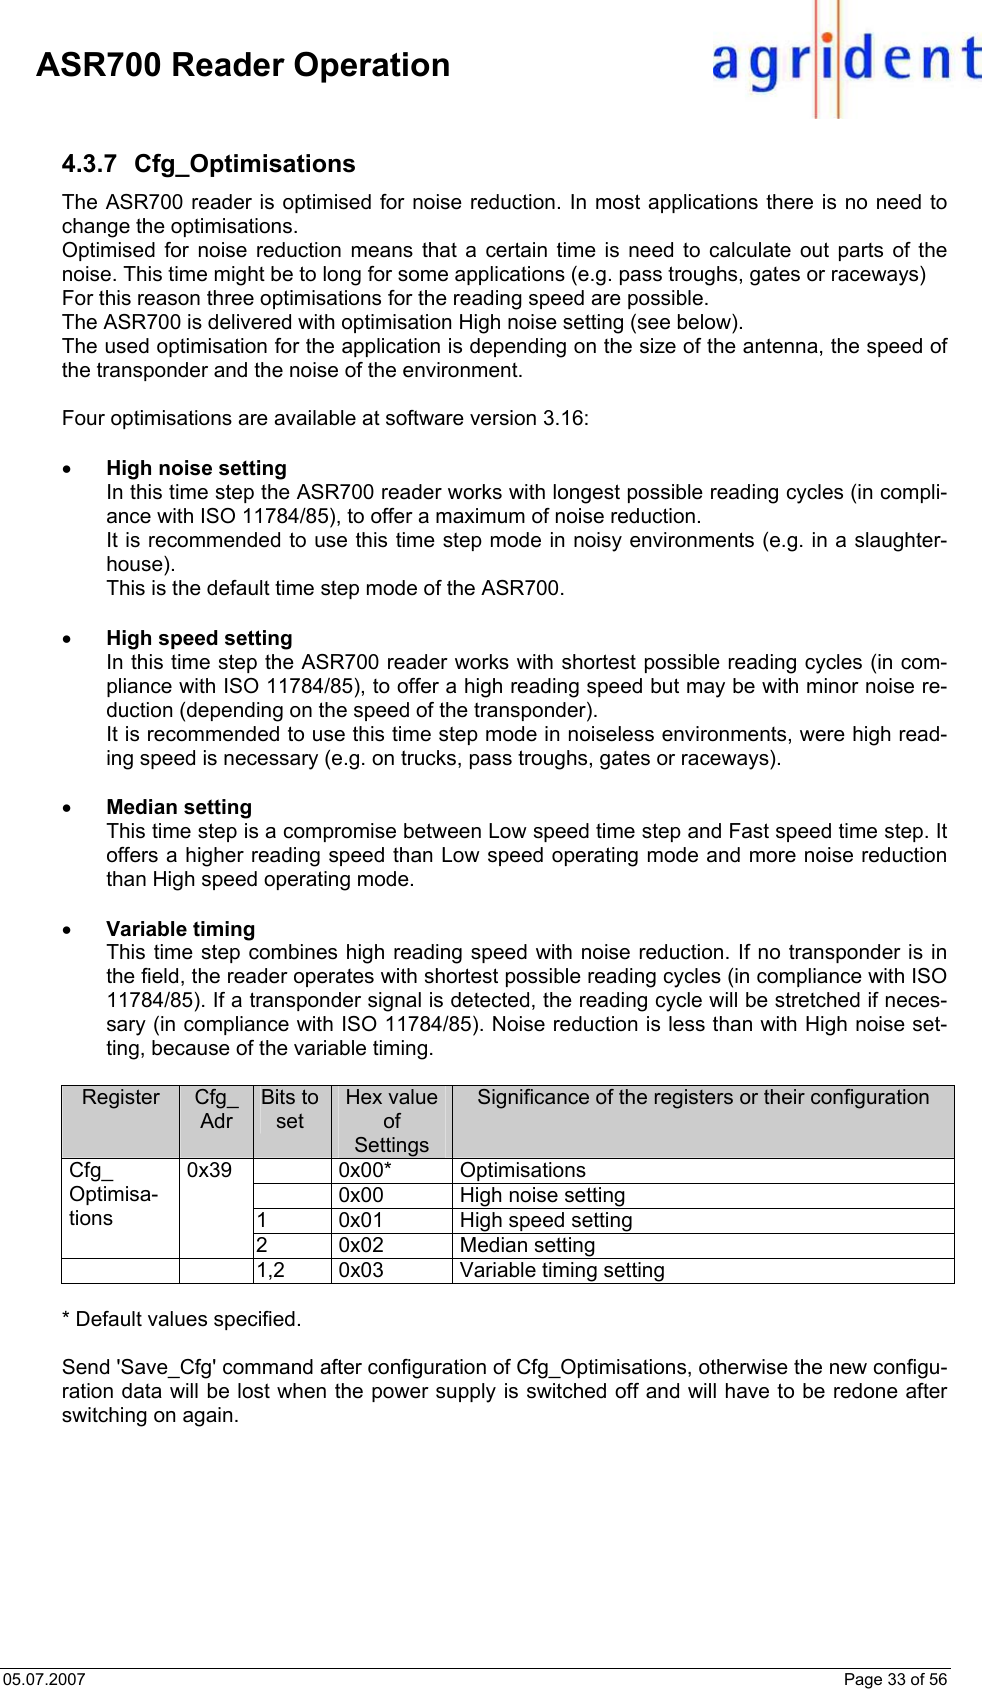 05.07.2007    Page 33 of 56     ASR700 Reader Operation  4.3.7 Cfg_Optimisations The ASR700 reader is optimised for noise reduction. In most applications there is no need to change the optimisations. Optimised for noise reduction means that a certain time is need to calculate out parts of the noise. This time might be to long for some applications (e.g. pass troughs, gates or raceways) For this reason three optimisations for the reading speed are possible.  The ASR700 is delivered with optimisation High noise setting (see below). The used optimisation for the application is depending on the size of the antenna, the speed of the transponder and the noise of the environment.    Four optimisations are available at software version 3.16:  • High noise setting In this time step the ASR700 reader works with longest possible reading cycles (in compli-ance with ISO 11784/85), to offer a maximum of noise reduction. It is recommended to use this time step mode in noisy environments (e.g. in a slaughter-house). This is the default time step mode of the ASR700.  • High speed setting In this time step the ASR700 reader works with shortest possible reading cycles (in com-pliance with ISO 11784/85), to offer a high reading speed but may be with minor noise re-duction (depending on the speed of the transponder). It is recommended to use this time step mode in noiseless environments, were high read-ing speed is necessary (e.g. on trucks, pass troughs, gates or raceways).  • Median setting This time step is a compromise between Low speed time step and Fast speed time step. It offers a higher reading speed than Low speed operating mode and more noise reduction than High speed operating mode.    • Variable timing This time step combines high reading speed with noise reduction. If no transponder is in the field, the reader operates with shortest possible reading cycles (in compliance with ISO 11784/85). If a transponder signal is detected, the reading cycle will be stretched if neces-sary (in compliance with ISO 11784/85). Noise reduction is less than with High noise set-ting, because of the variable timing.   Register  Cfg_ Adr Bits to set Hex value of Settings Significance of the registers or their configuration  0x00* Optimisations   0x00  High noise setting 1  0x01  High speed setting Cfg_ Optimisa-tions 0x39 2  0x02  Median setting      1,2  0x03  Variable timing setting  * Default values specified.  Send &apos;Save_Cfg&apos; command after configuration of Cfg_Optimisations, otherwise the new configu-ration data will be lost when the power supply is switched off and will have to be redone after switching on again. 